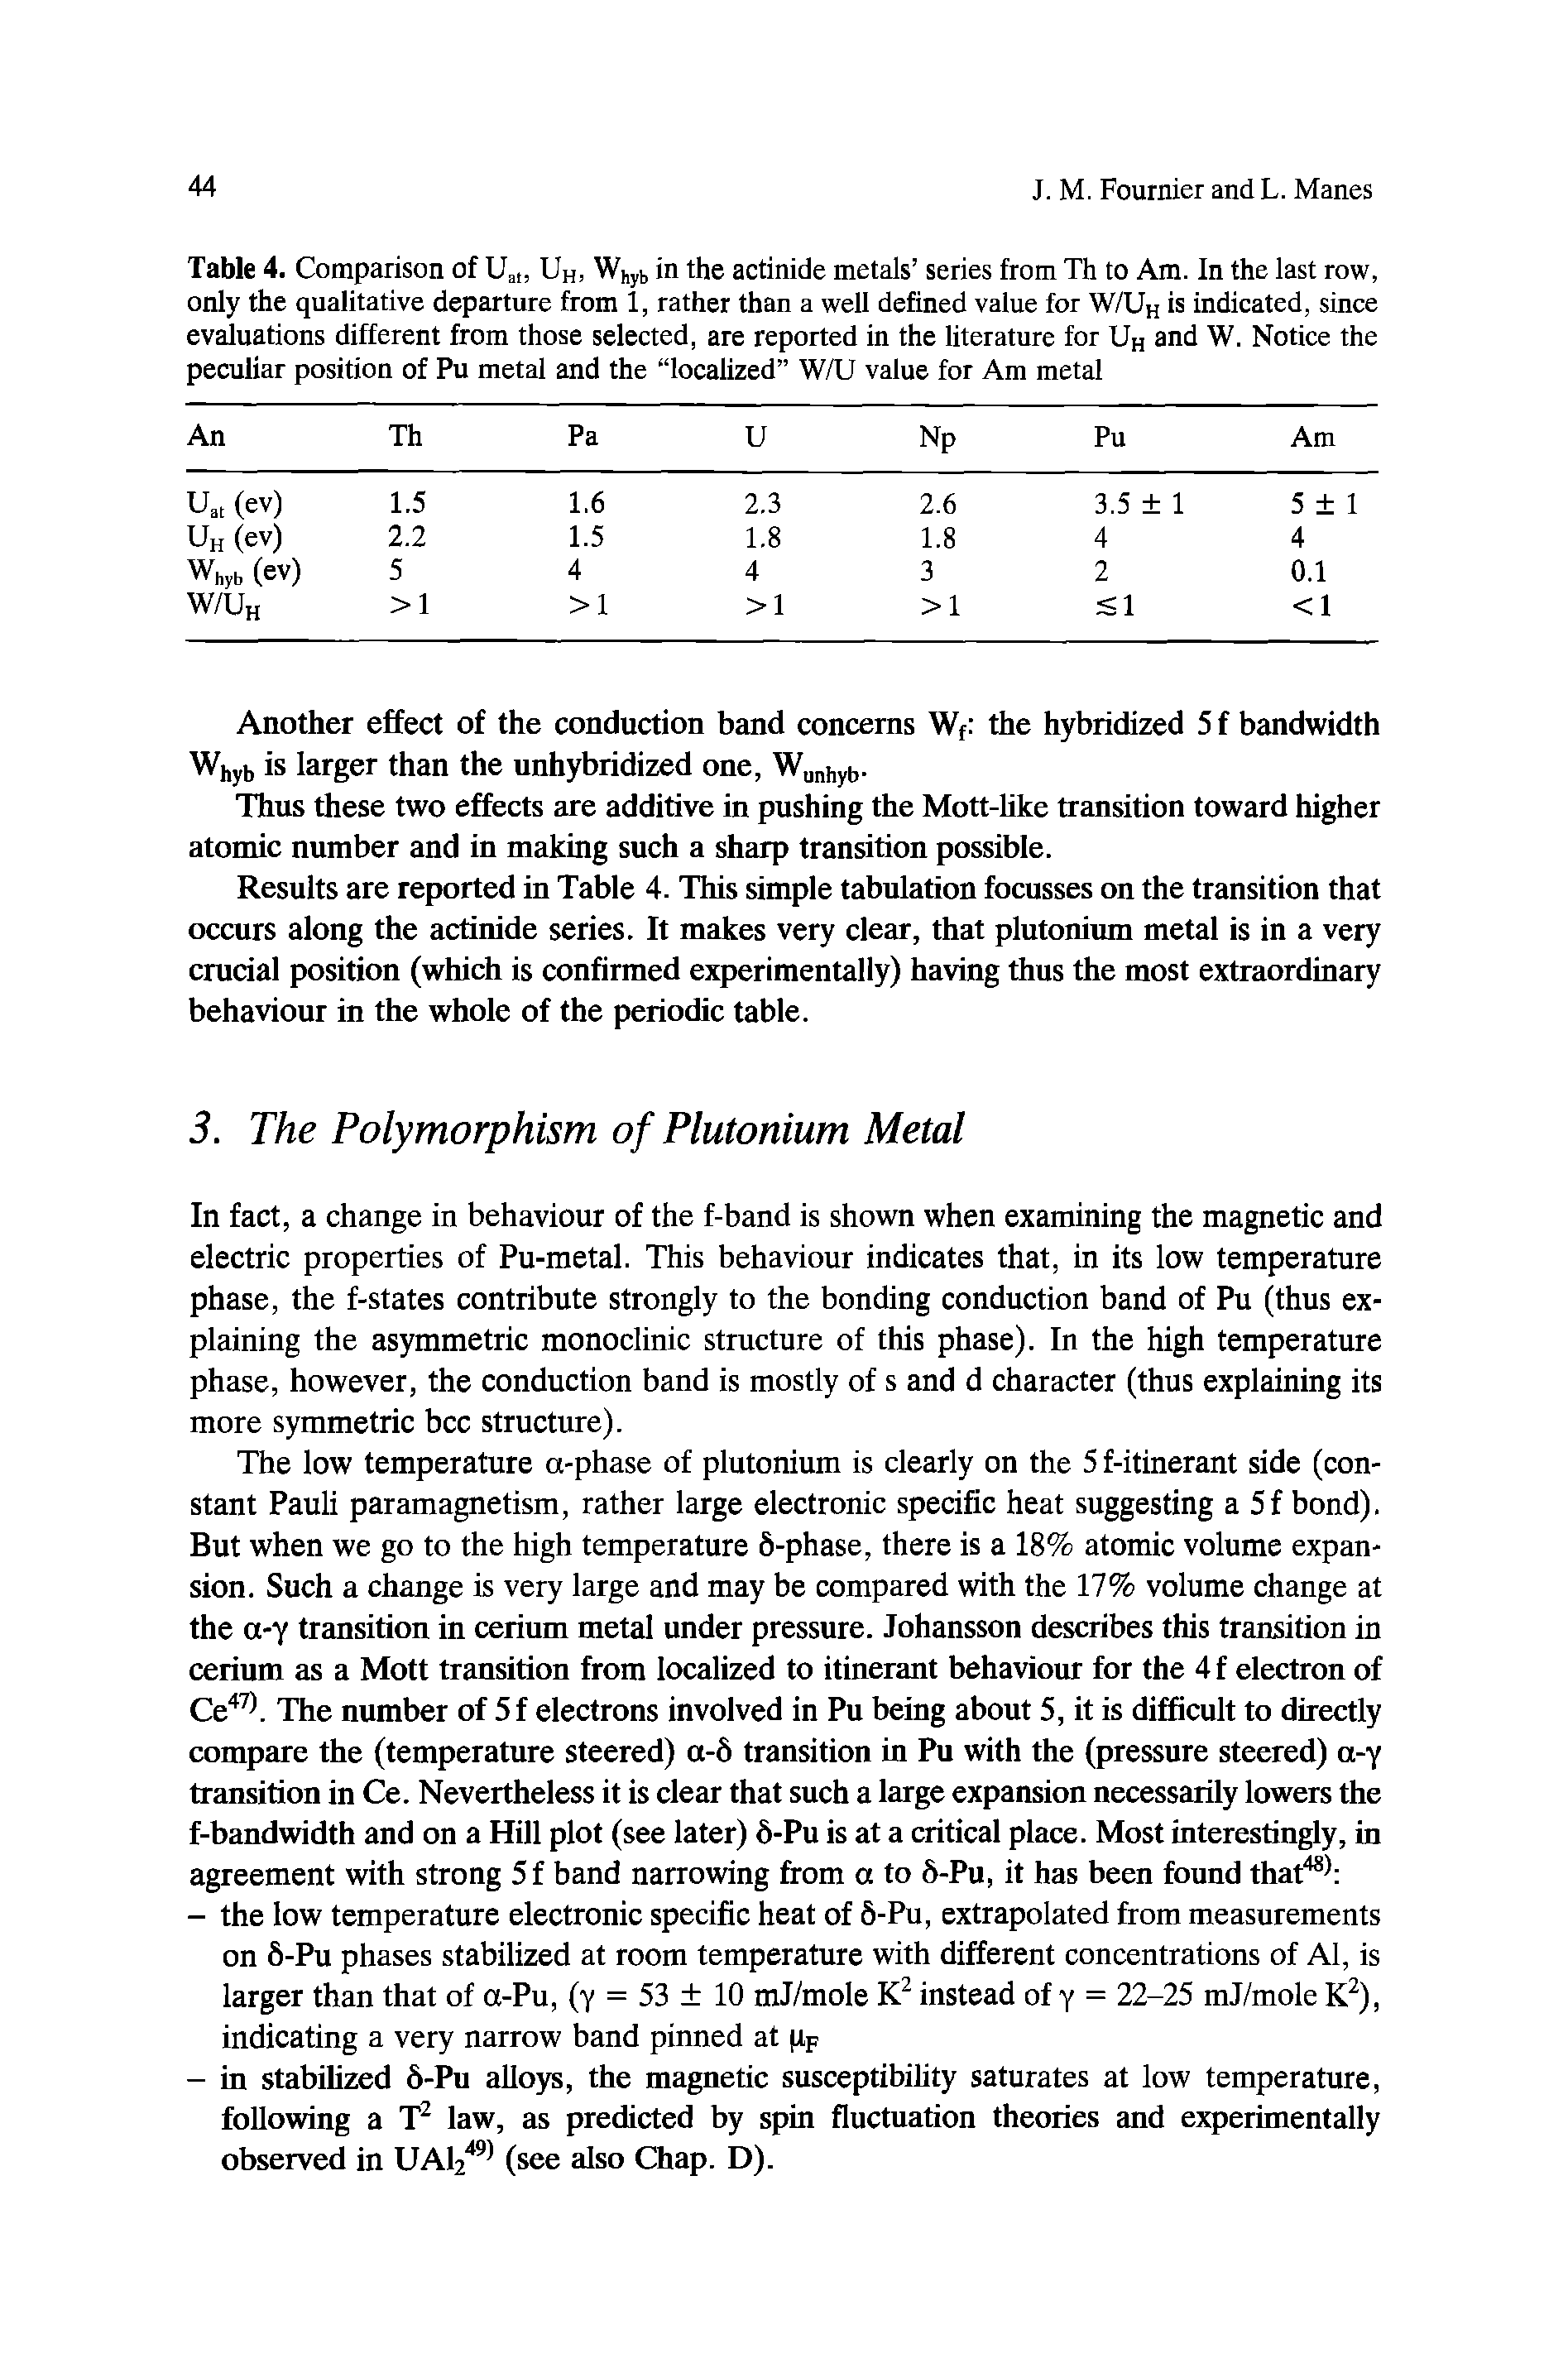 Table 4. Comparison of Ua Uh, Whyb in the actinide metals series from Th to Am. In the last row, only the qualitative departure from 1, rather than a well defined value for W/Uh is indicated, since evaluations different from those selected, are reported in the literature for Uh and W. Notice the peculiar position of Pu metal and the localized WAJ value for Am metal...